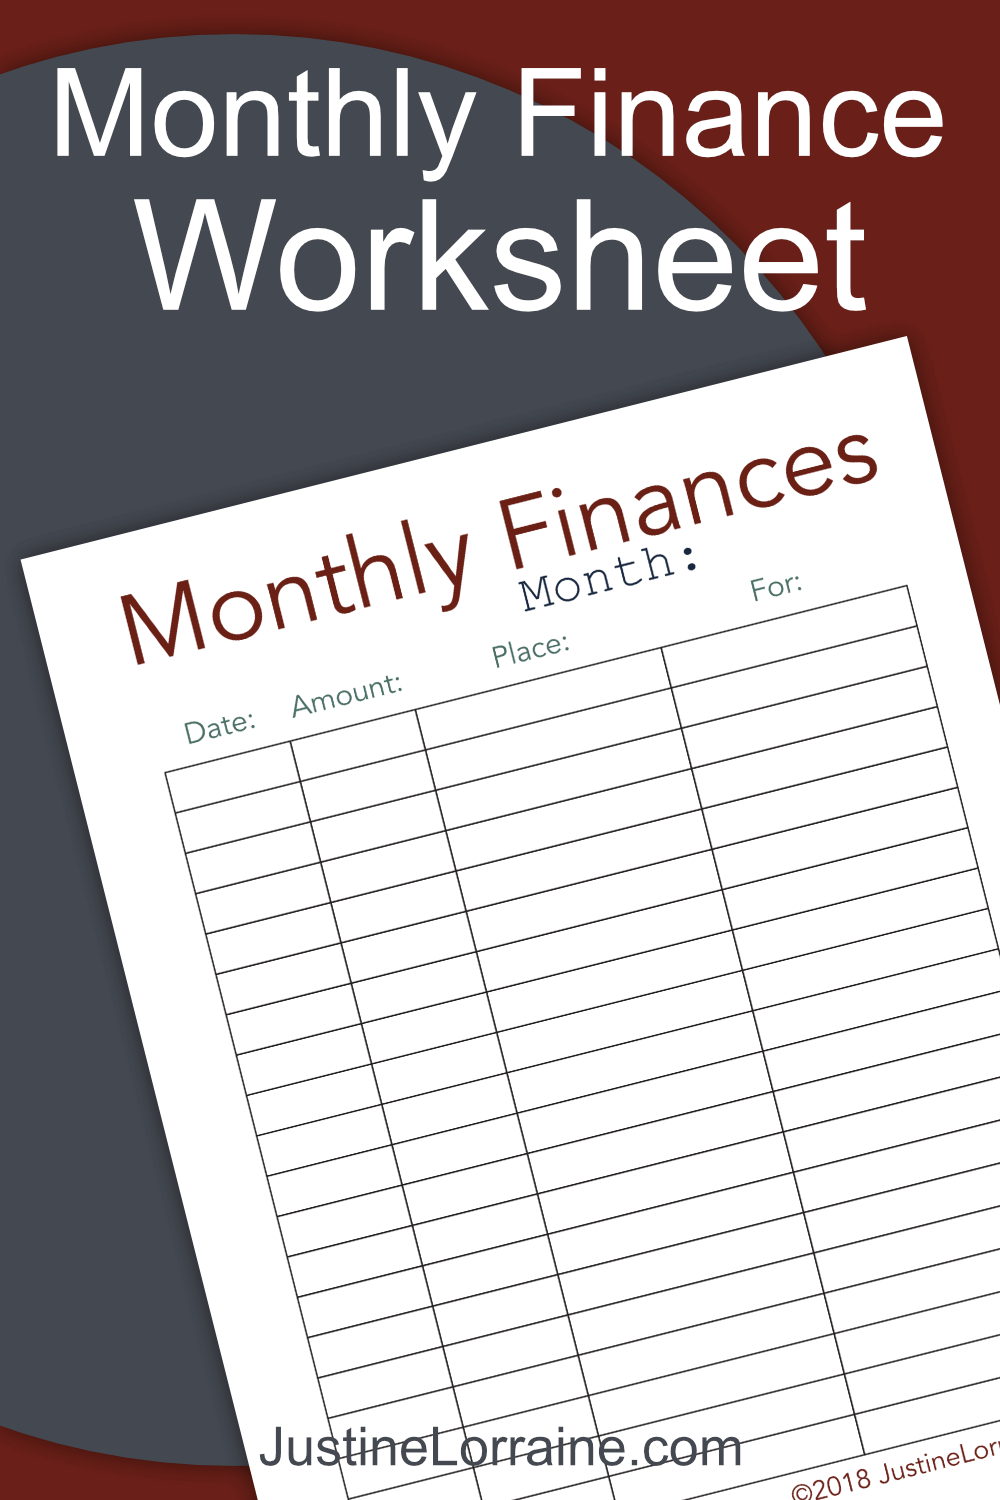 Use this Monthly Finance Worksheet to keep track of money spent each month.